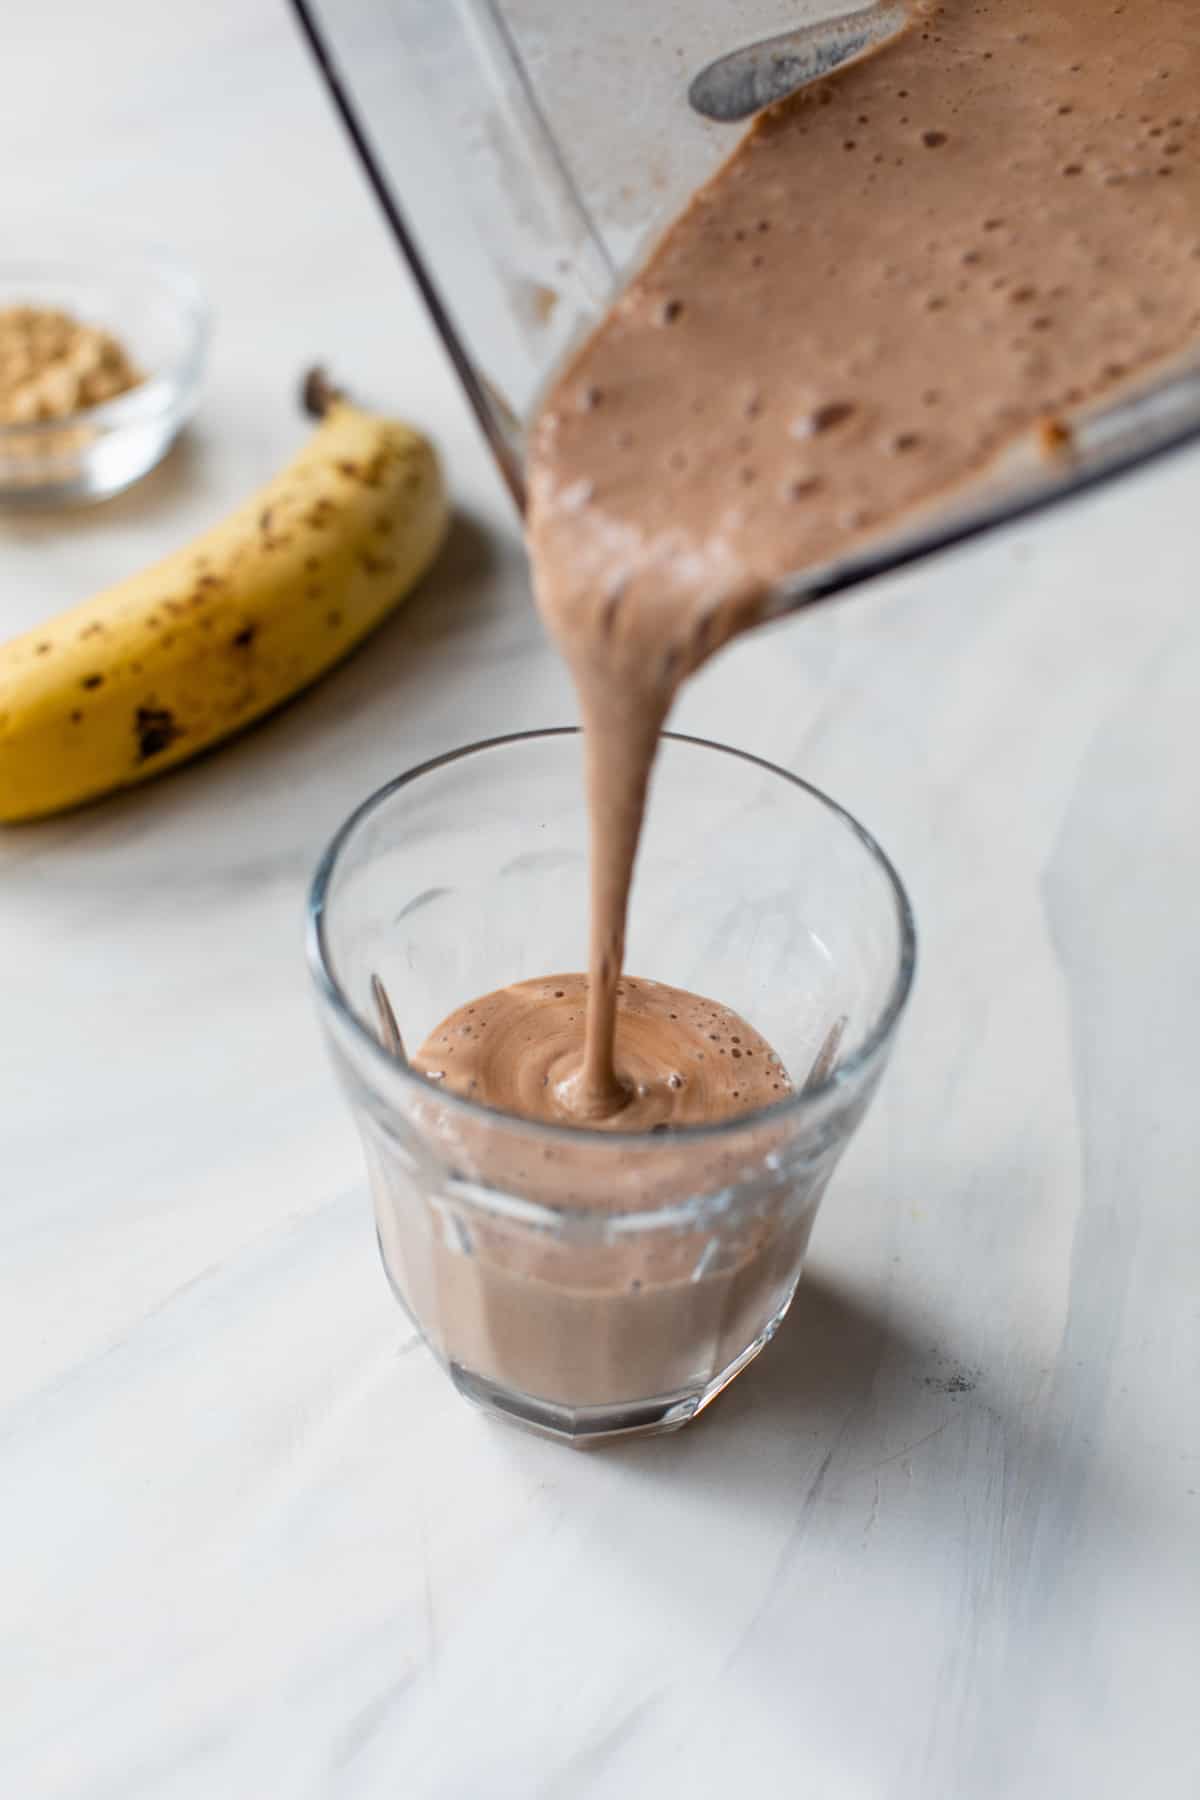 banana pb fit chocolate shaking pouring from the blender into a glass